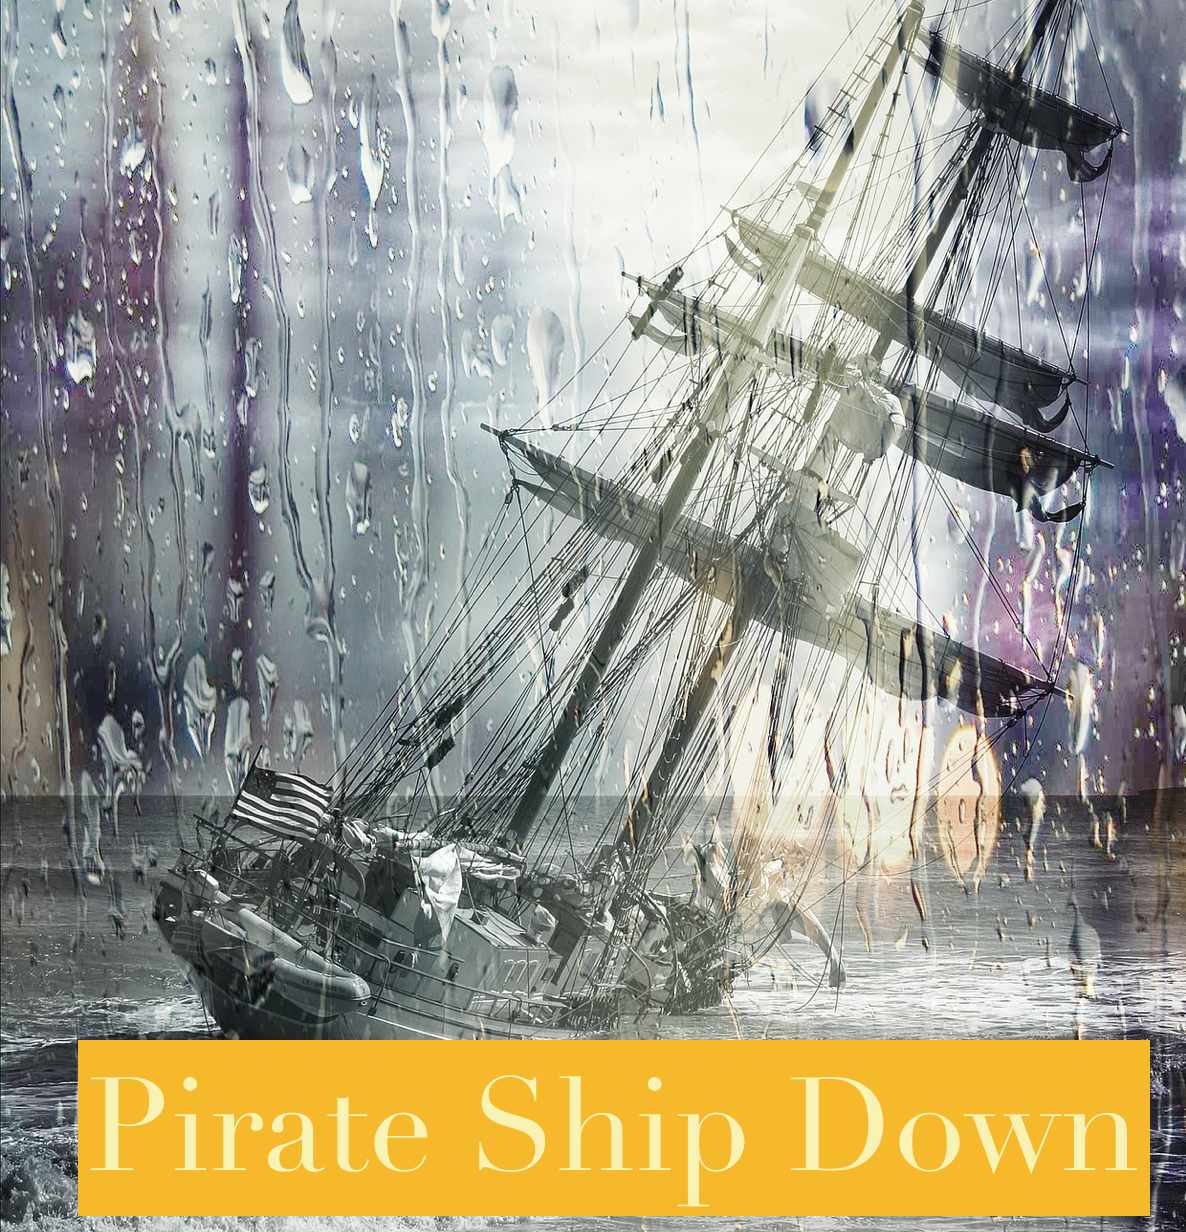 Featured image for “Pirate Ship Down”